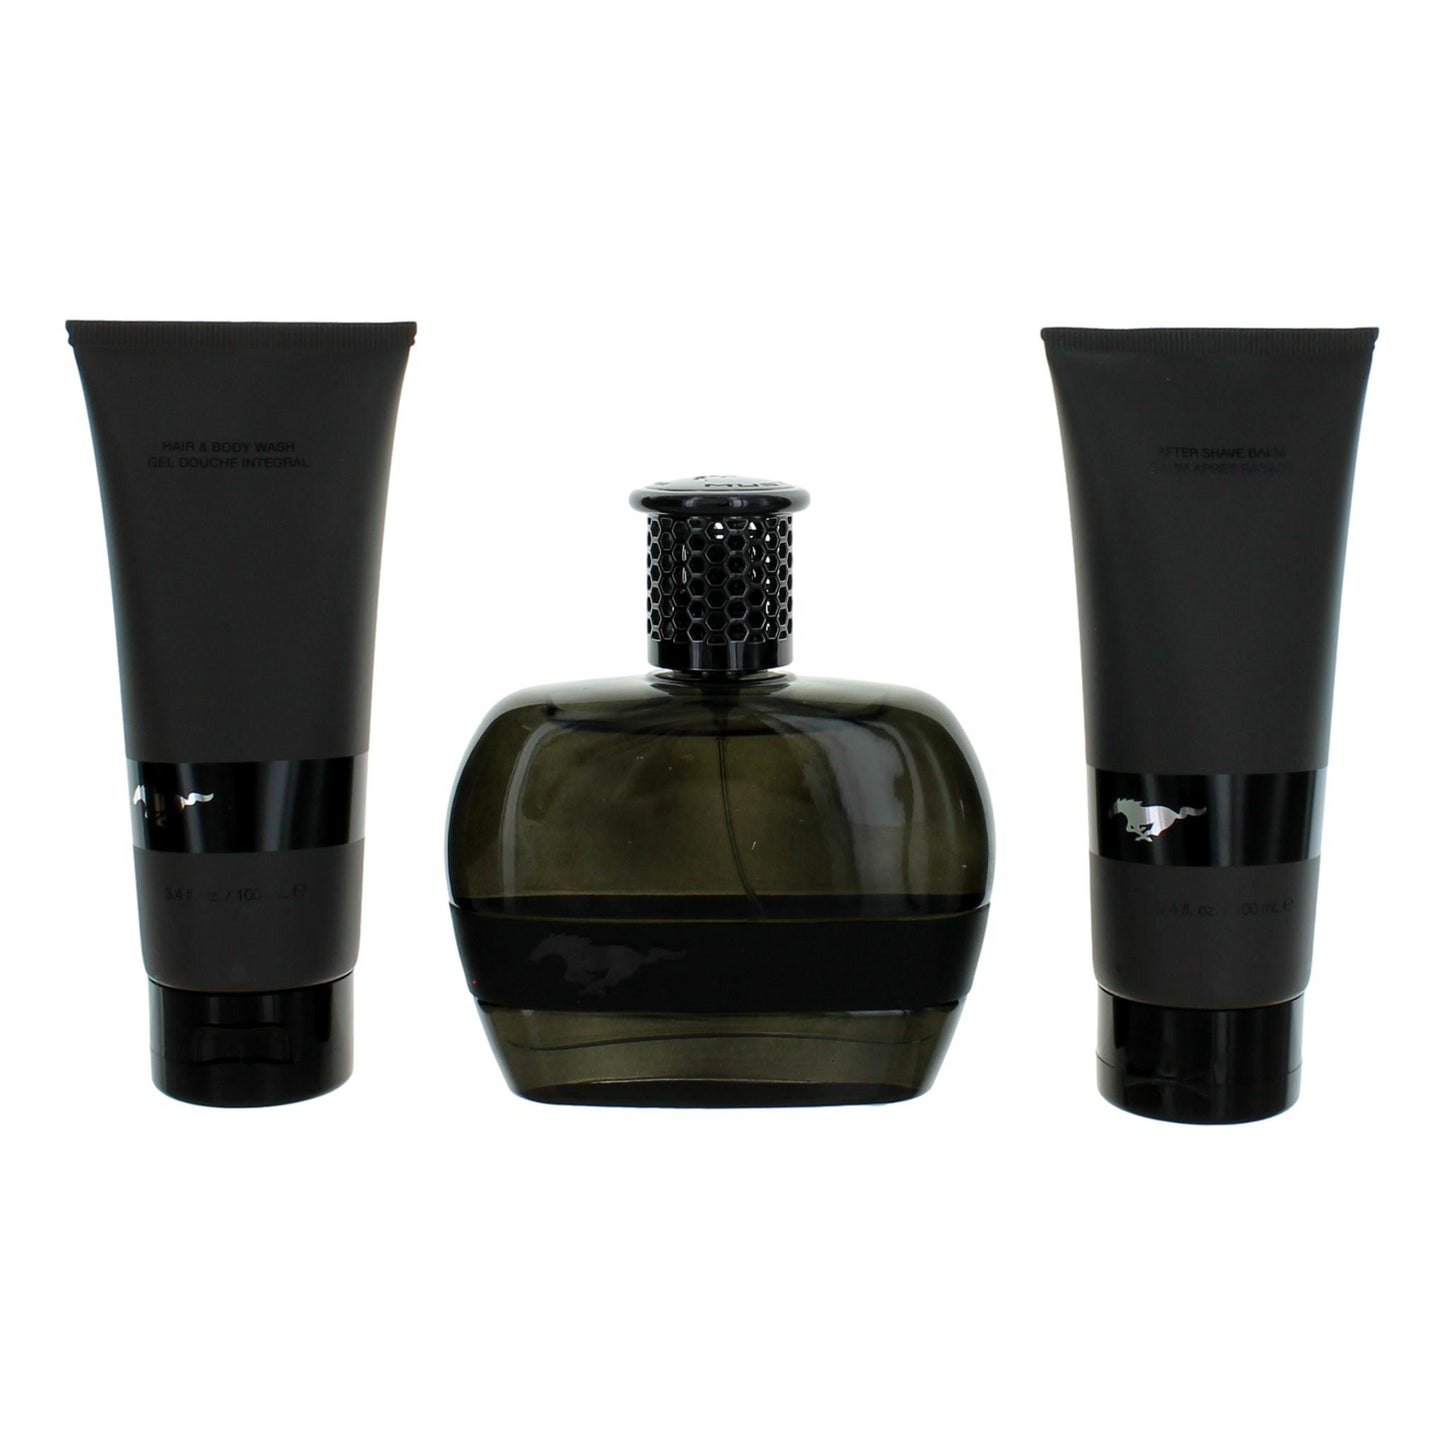 Bottle of Mustang Black by Mustang, 3 Piece Gift Set for Men